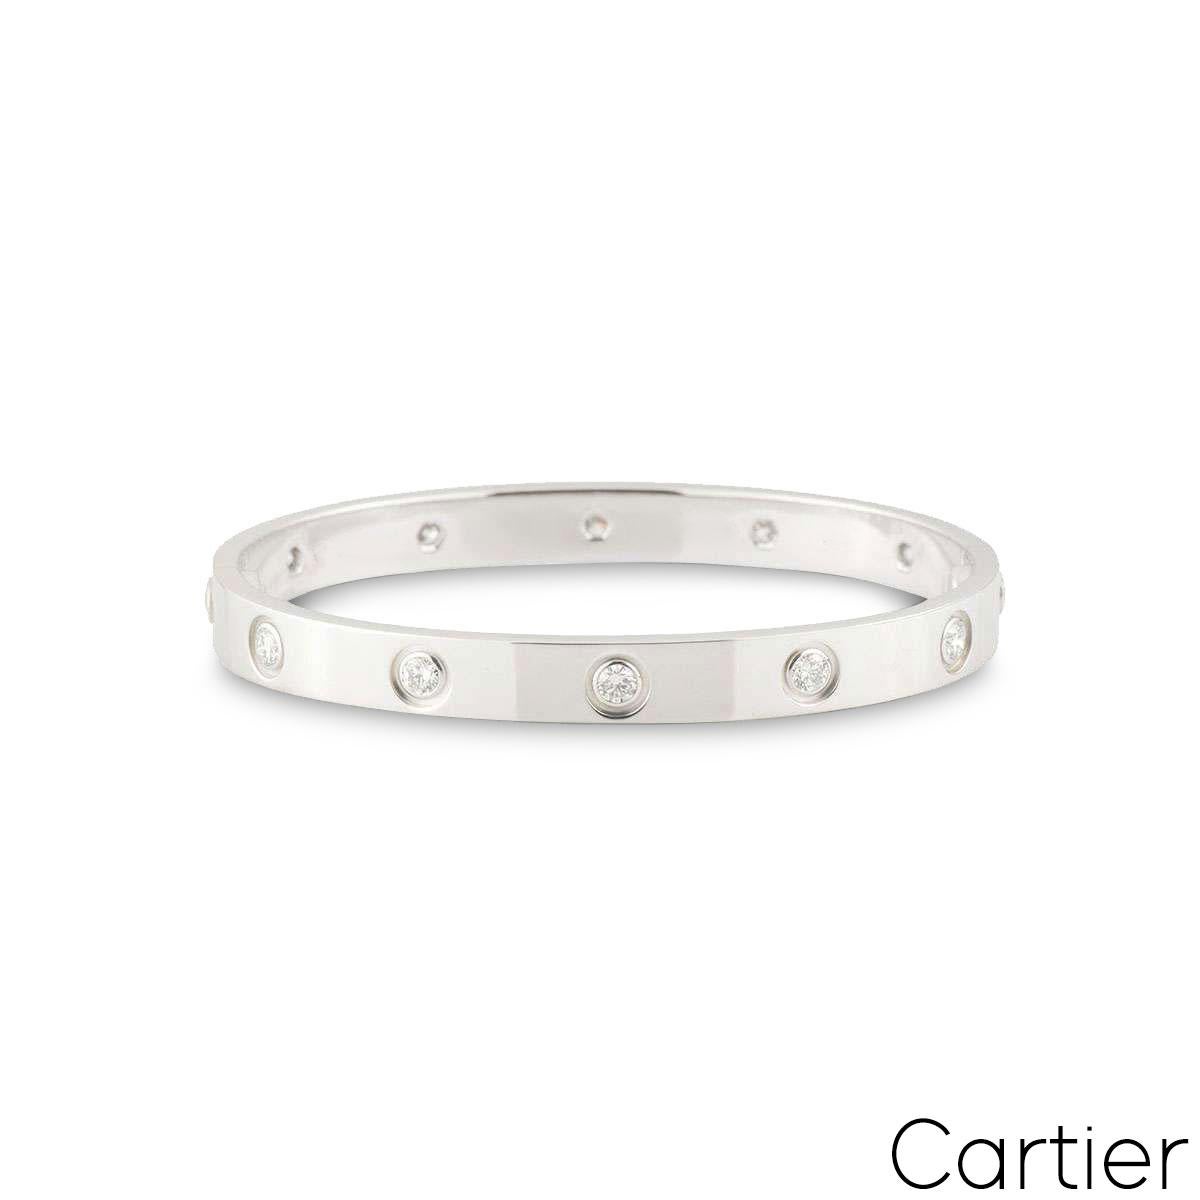 An 18k white gold full diamond Cartier bracelet from the Love collection. The bracelet is set with 10 round brilliant cut diamonds circulating the outer edge throughout in a rubover setting totaling 0.96ct. The bracelet is size 18 and features the